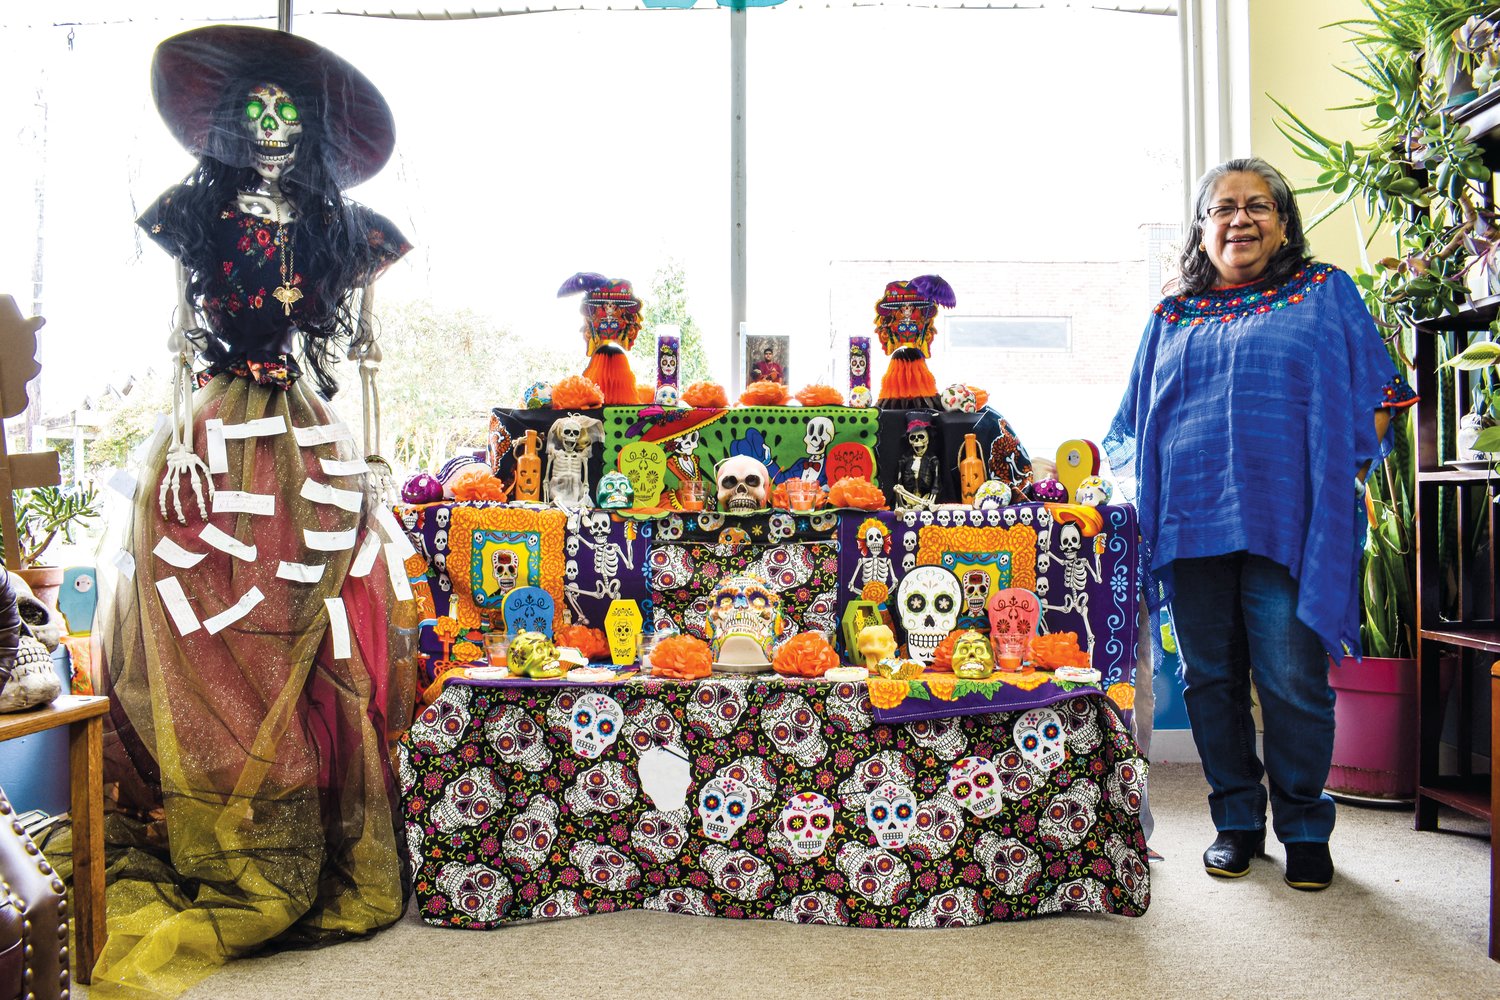 Communities In Schools’ Maria Soto stands next to the Day of the Dead altar she constructed inside the nonprofit’s Siler City office. Day of the Dead, or Día de Muertos in Spanish, is a Mexican and Latin American holiday that honors and remembers deceased loved ones.